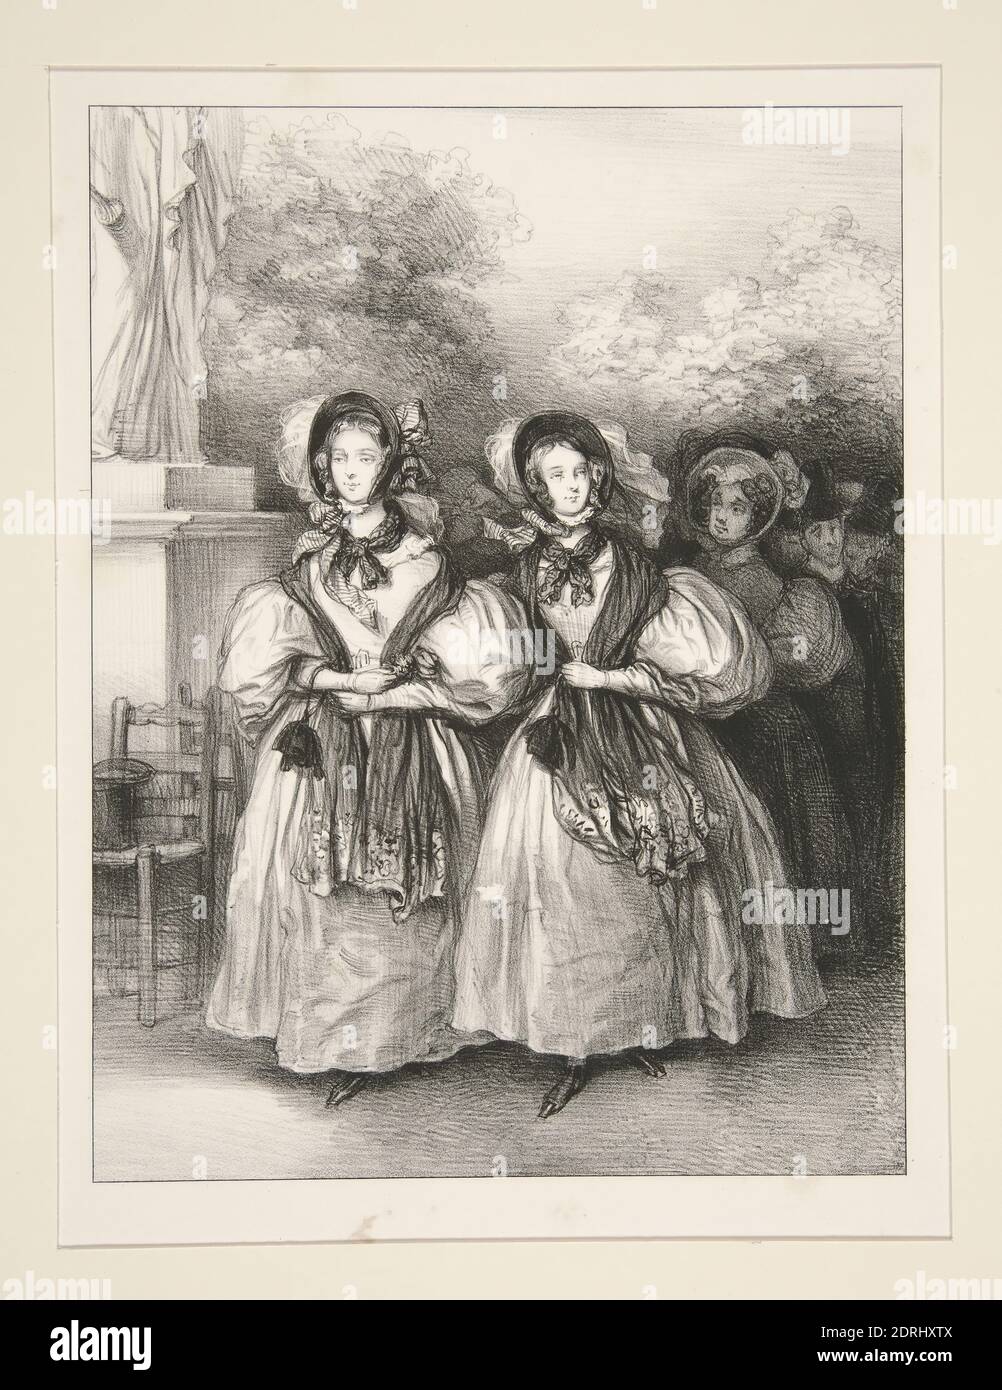 Artist: Paul Gavarni, French, 1804–1866, Deux Soeurs, Lithograph, French, 19th century, Works on Paper - Prints Stock Photo